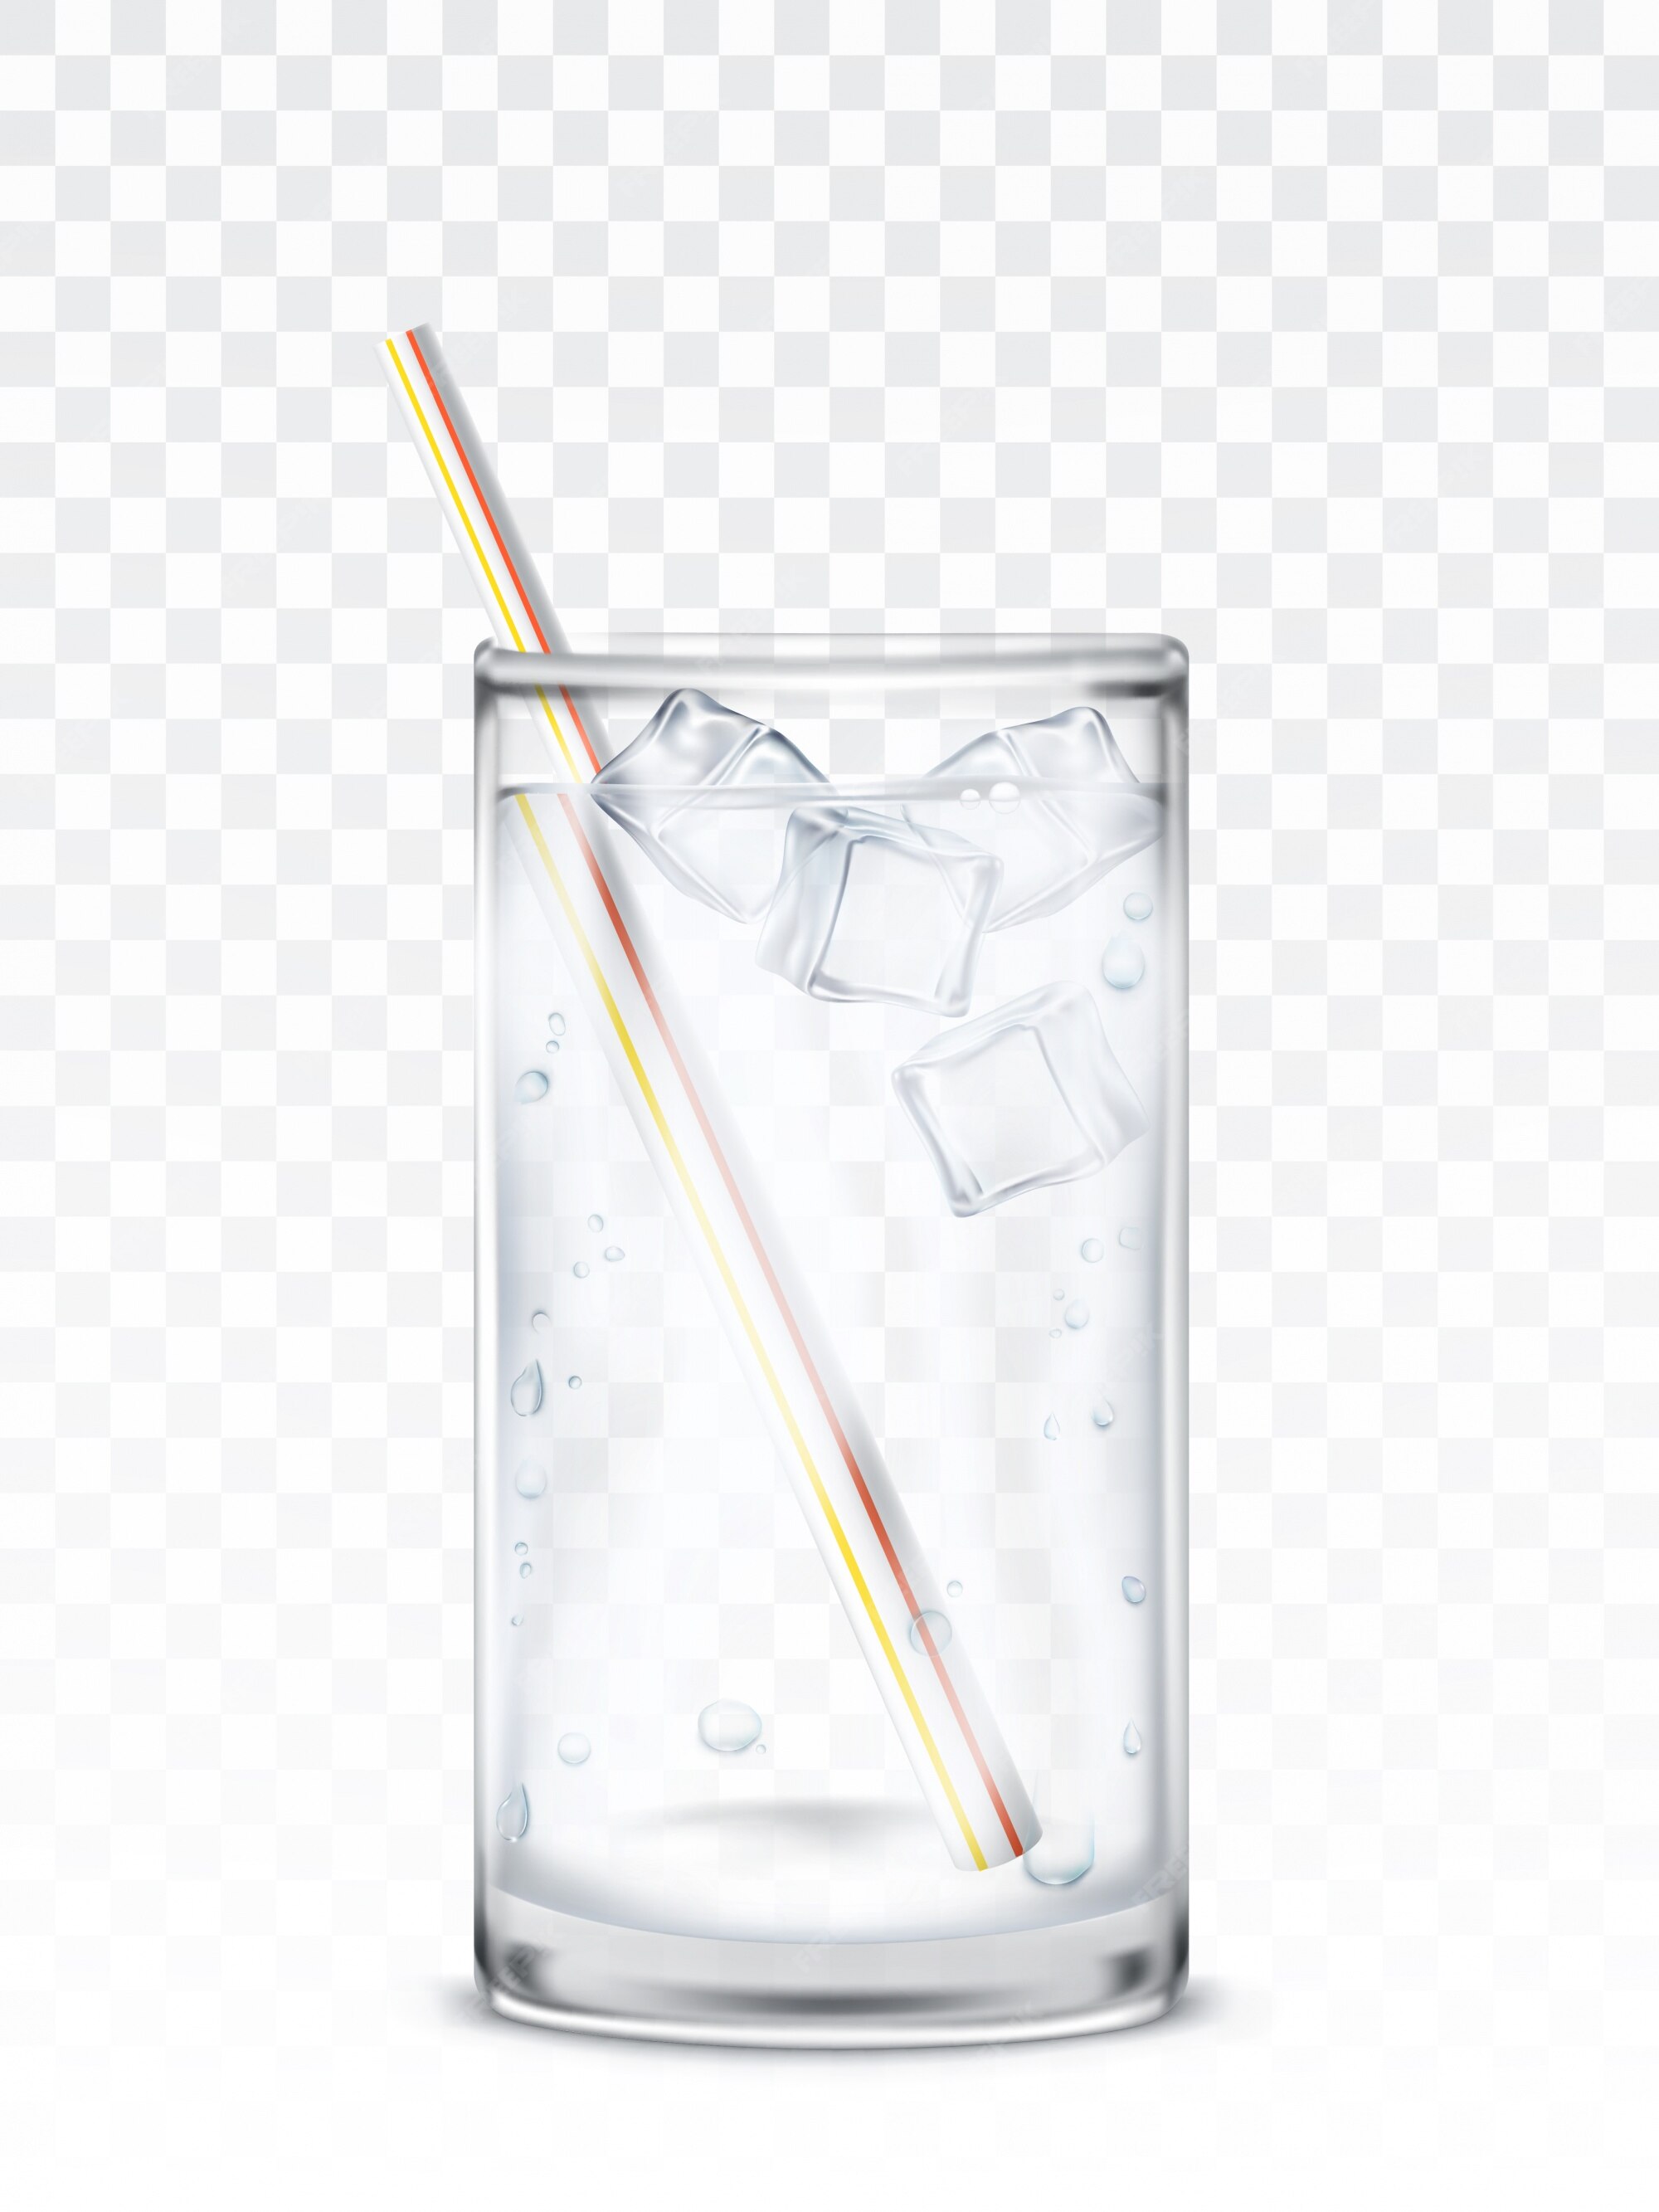 Water glass with straw drawing Royalty Free Vector Image